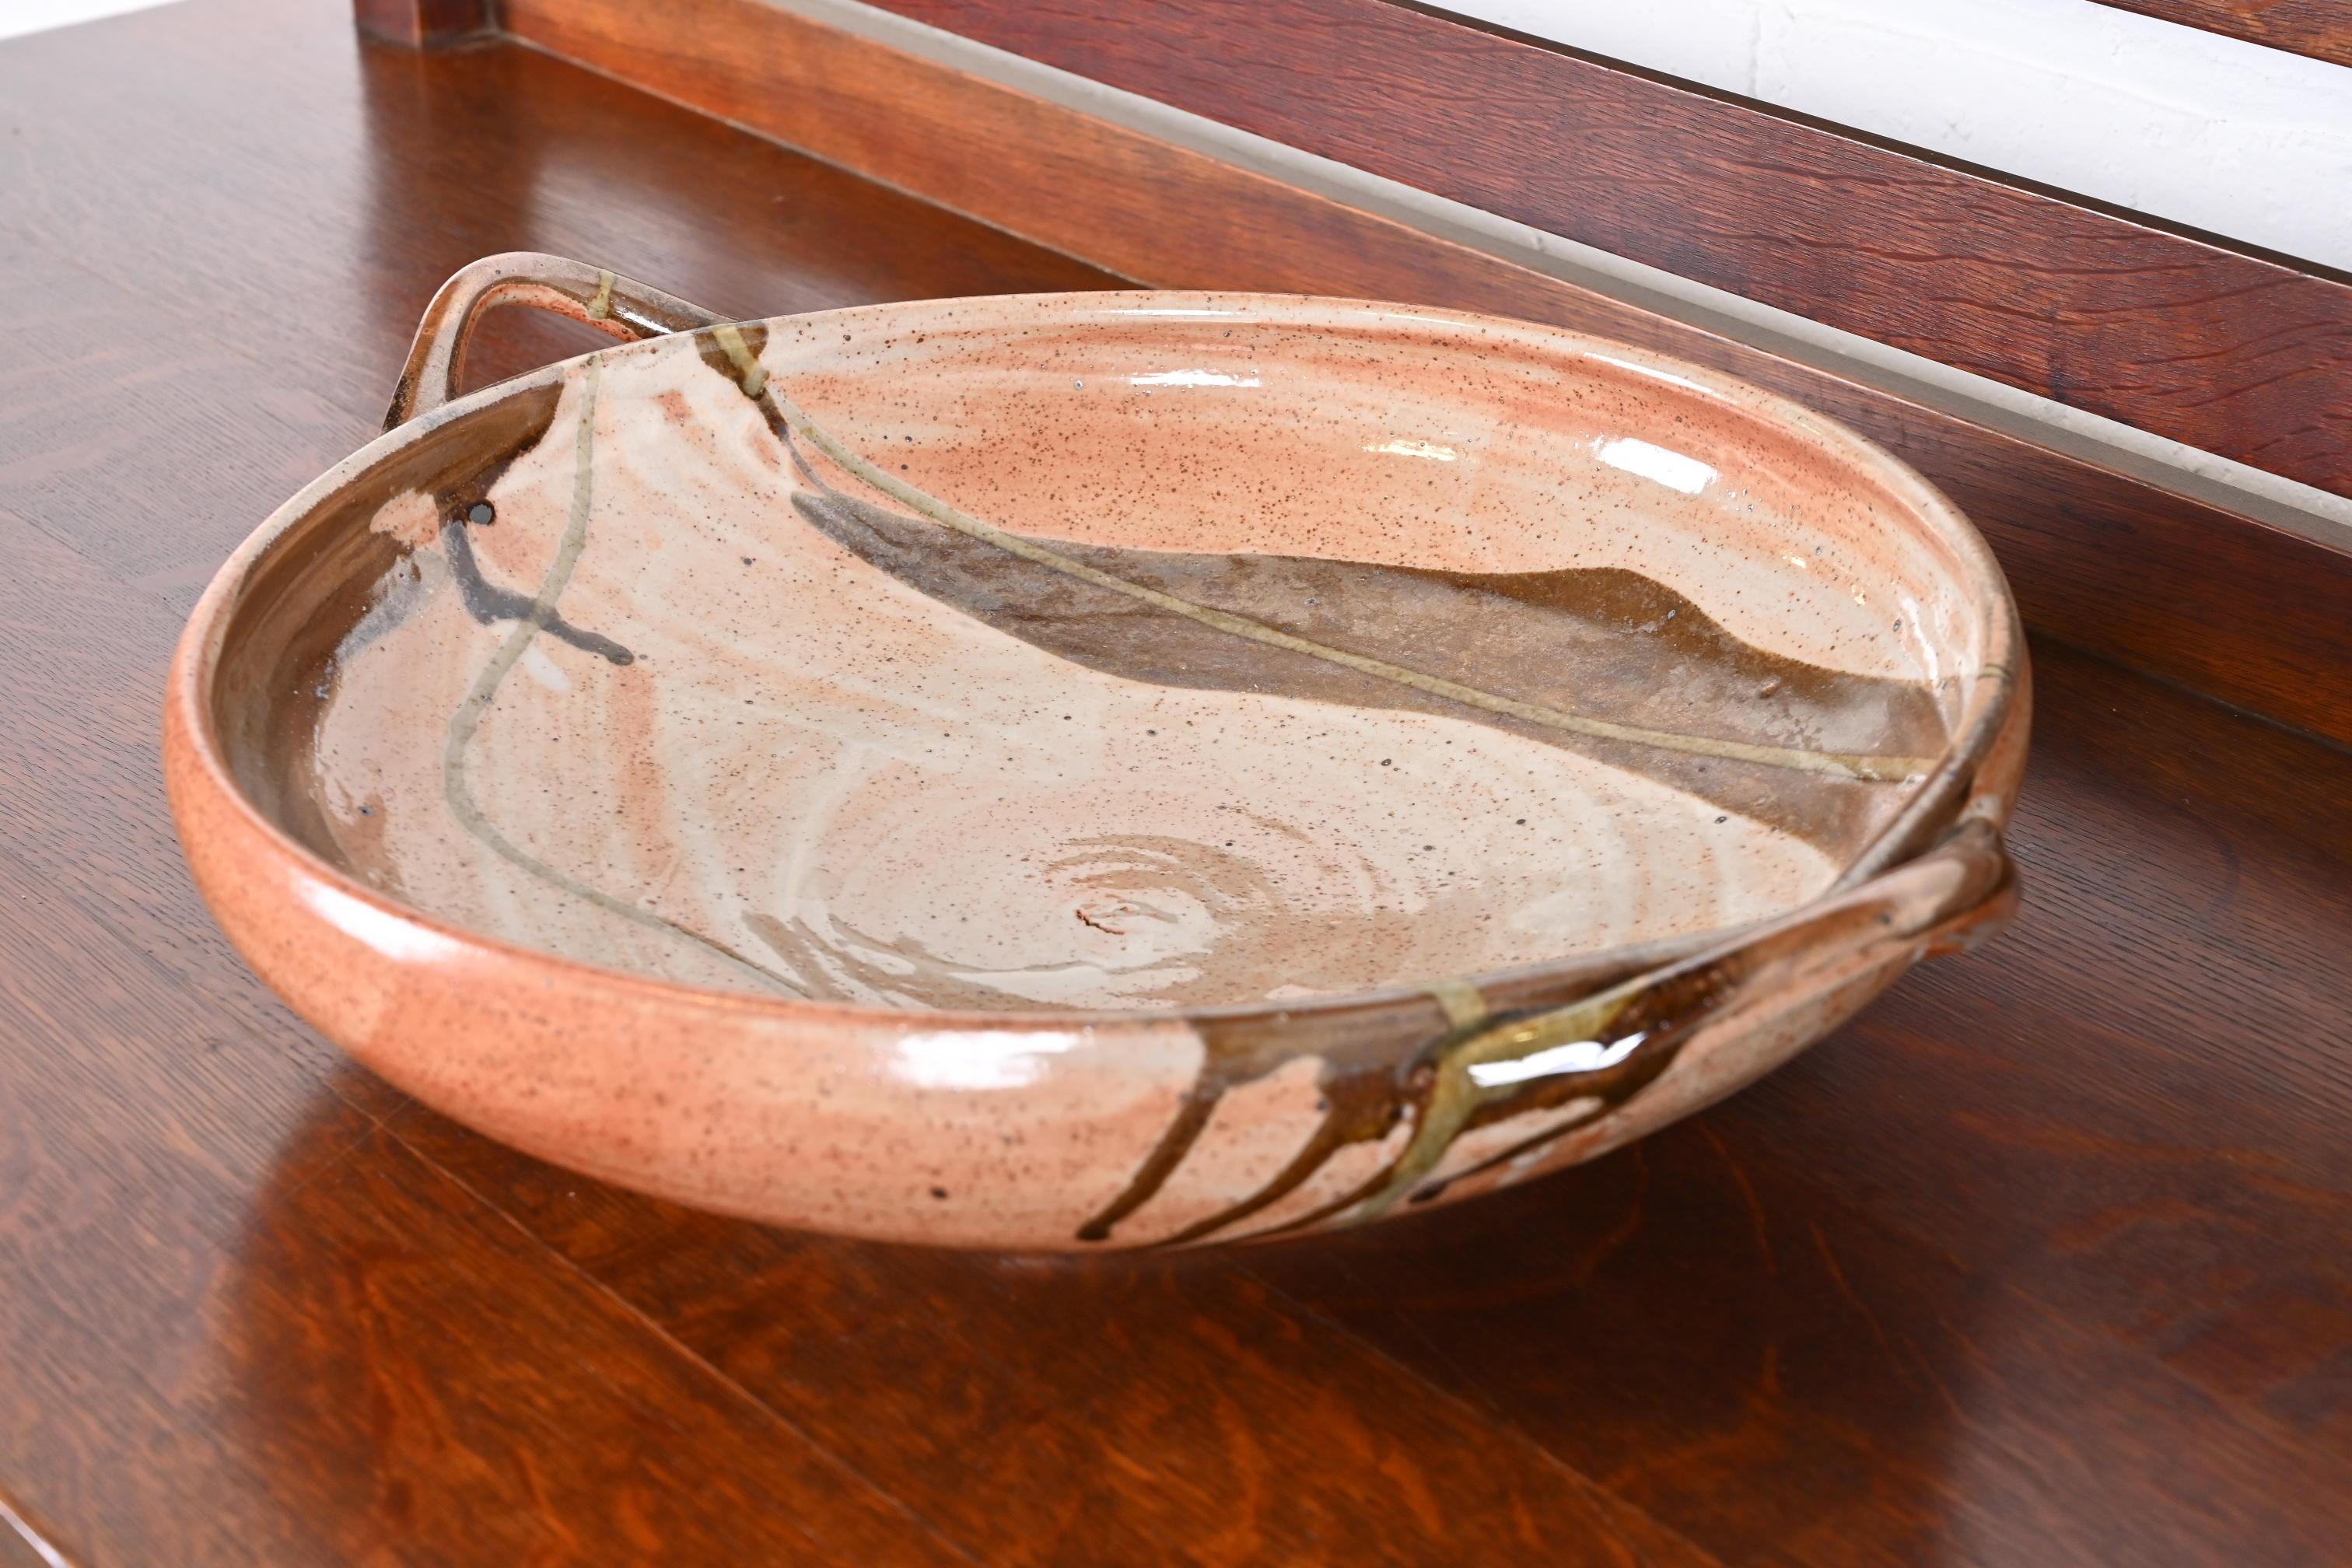 Large Painted Glazed Ceramic Studio Pottery Bowl With Handles In Good Condition For Sale In South Bend, IN